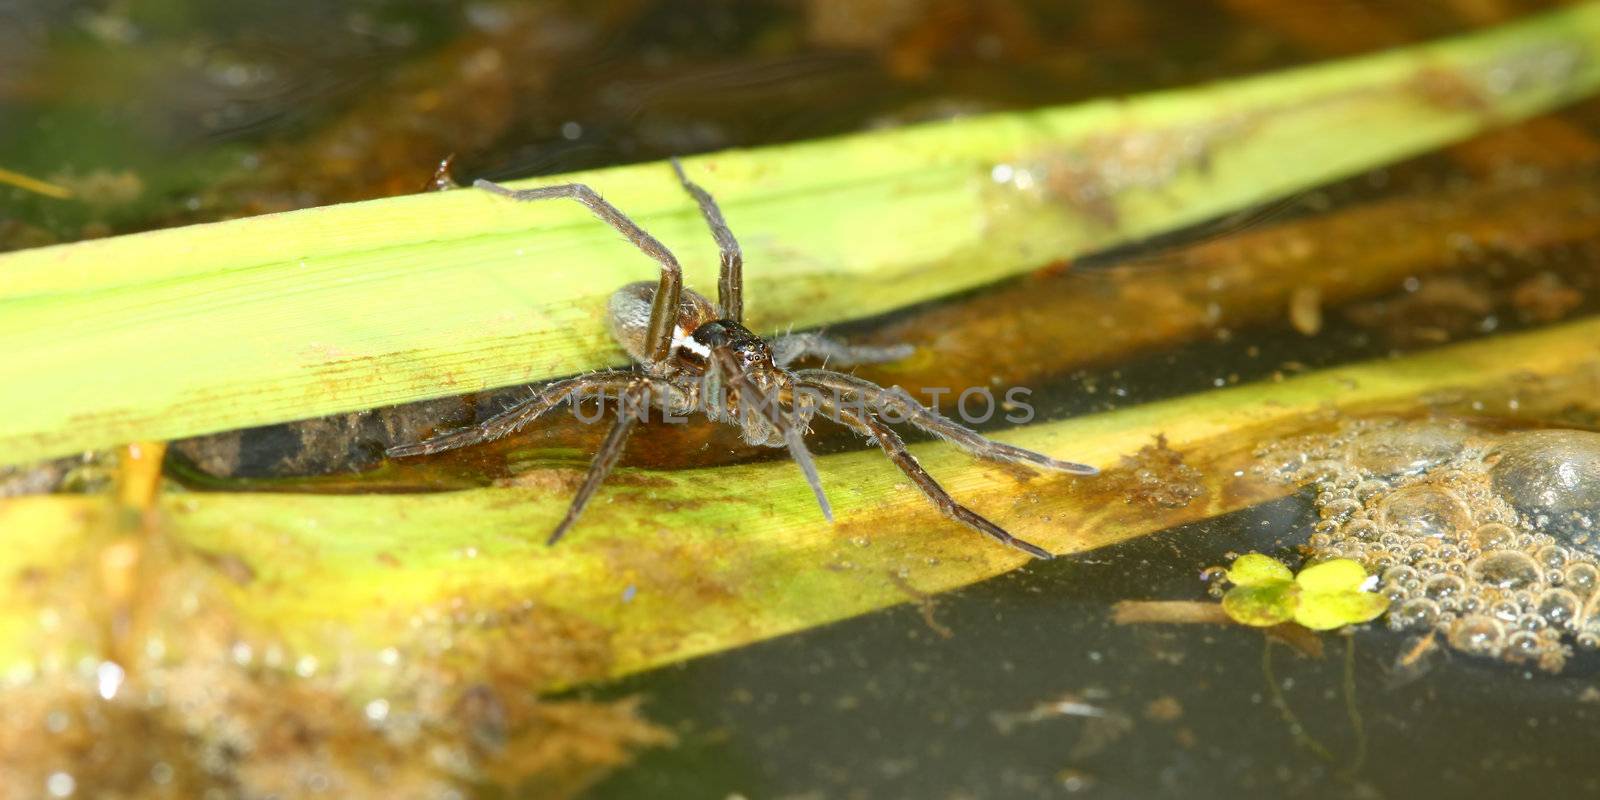 Six-spotted Fishing Spider (Dolomedes triton) by Wirepec